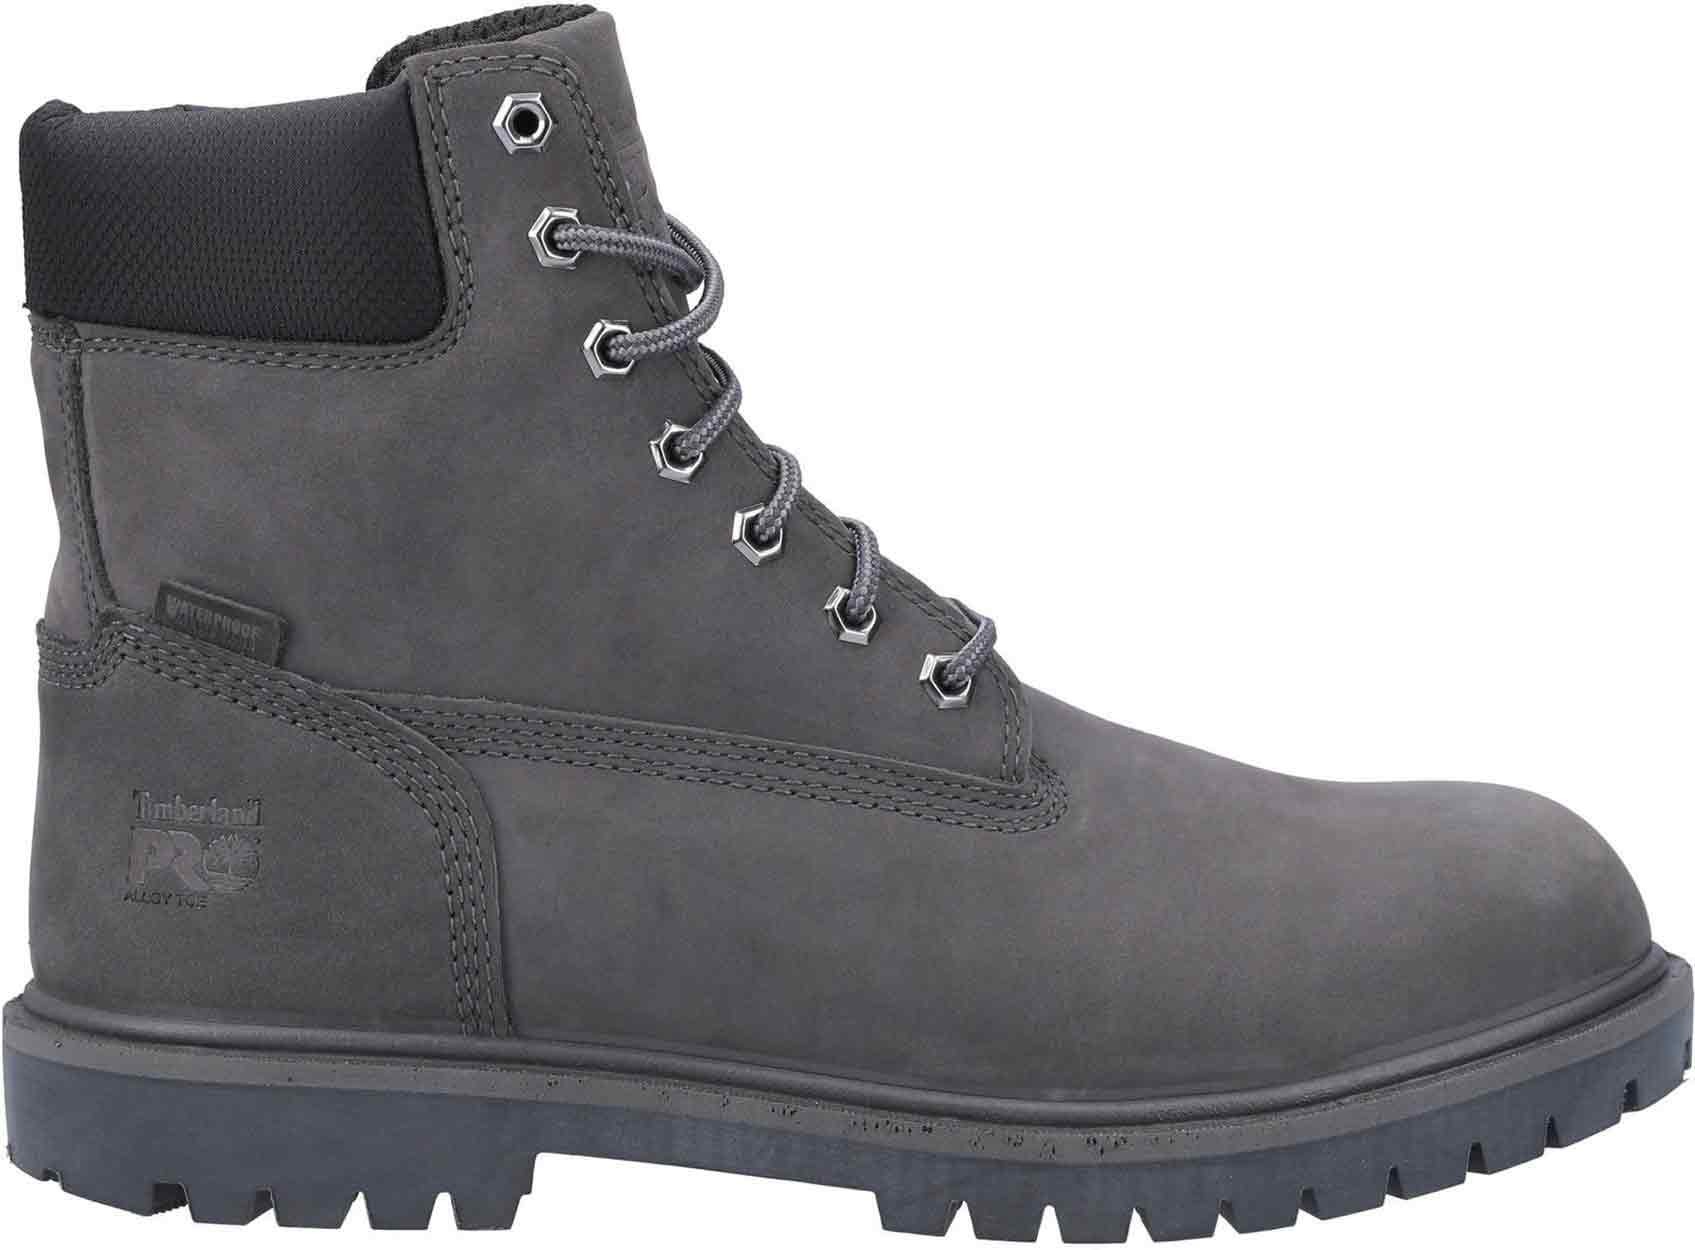 Timberland Pro Iconic S3 Boot Grey - Standard Safety Boots - Mens Safety  Boots & Shoes - Safety Footwear - Best Workwear